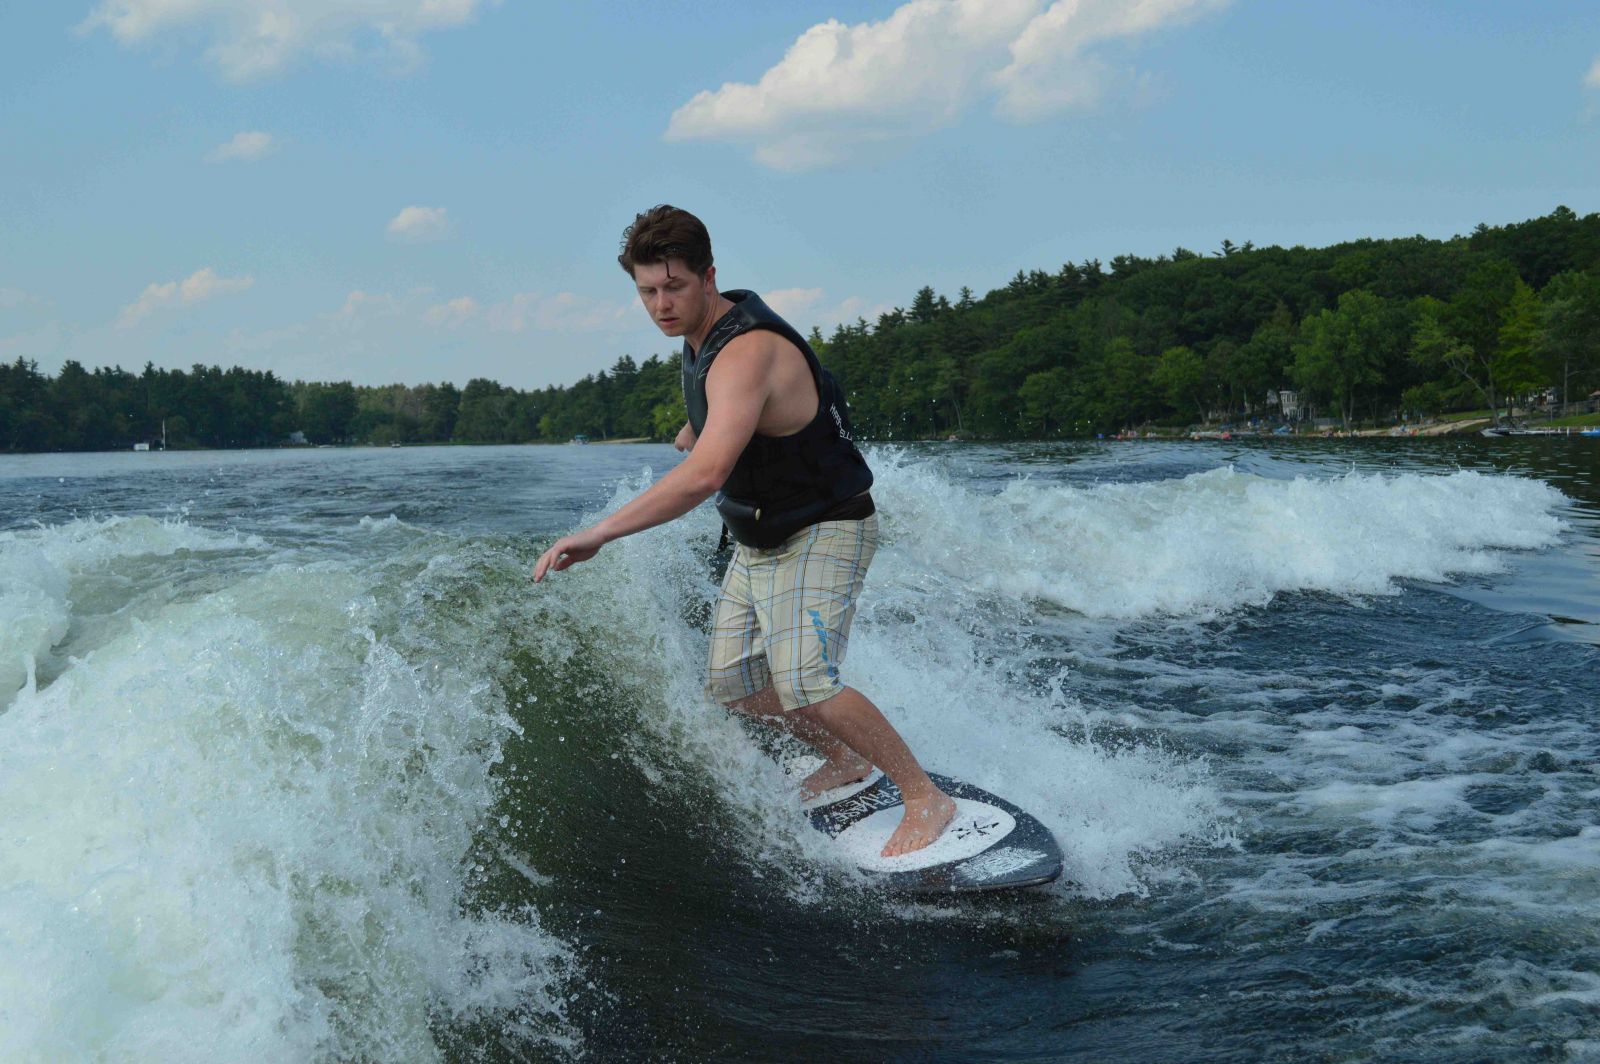 Wakesurfing without the rope